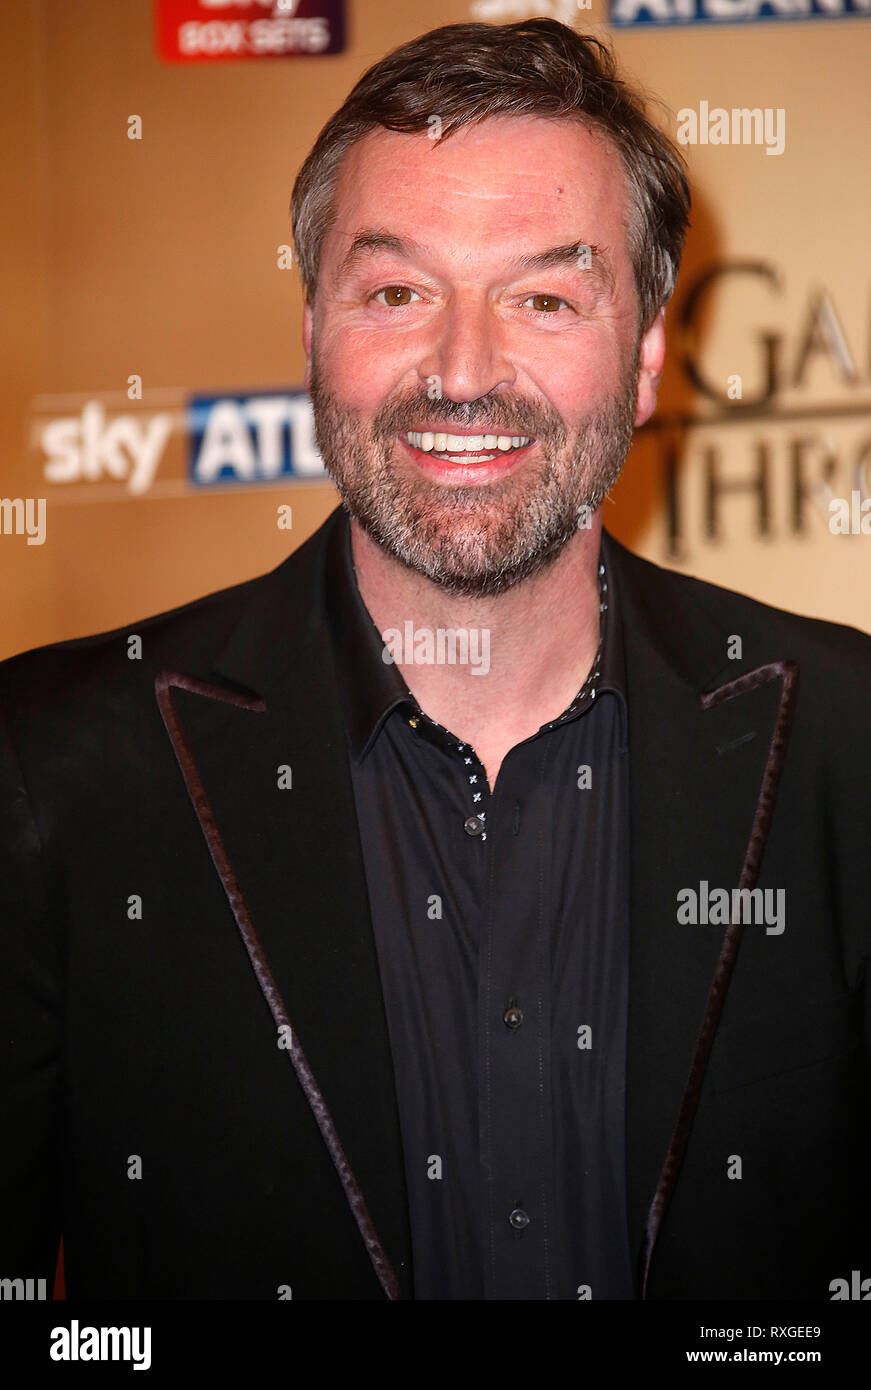 Mar 18, 2015 - London, England, UK - Game of Thrones Season 5 World Premiere, The Tower of London - Red carpet Arrivals Photo Shows: Ian Beattie Stock Photo